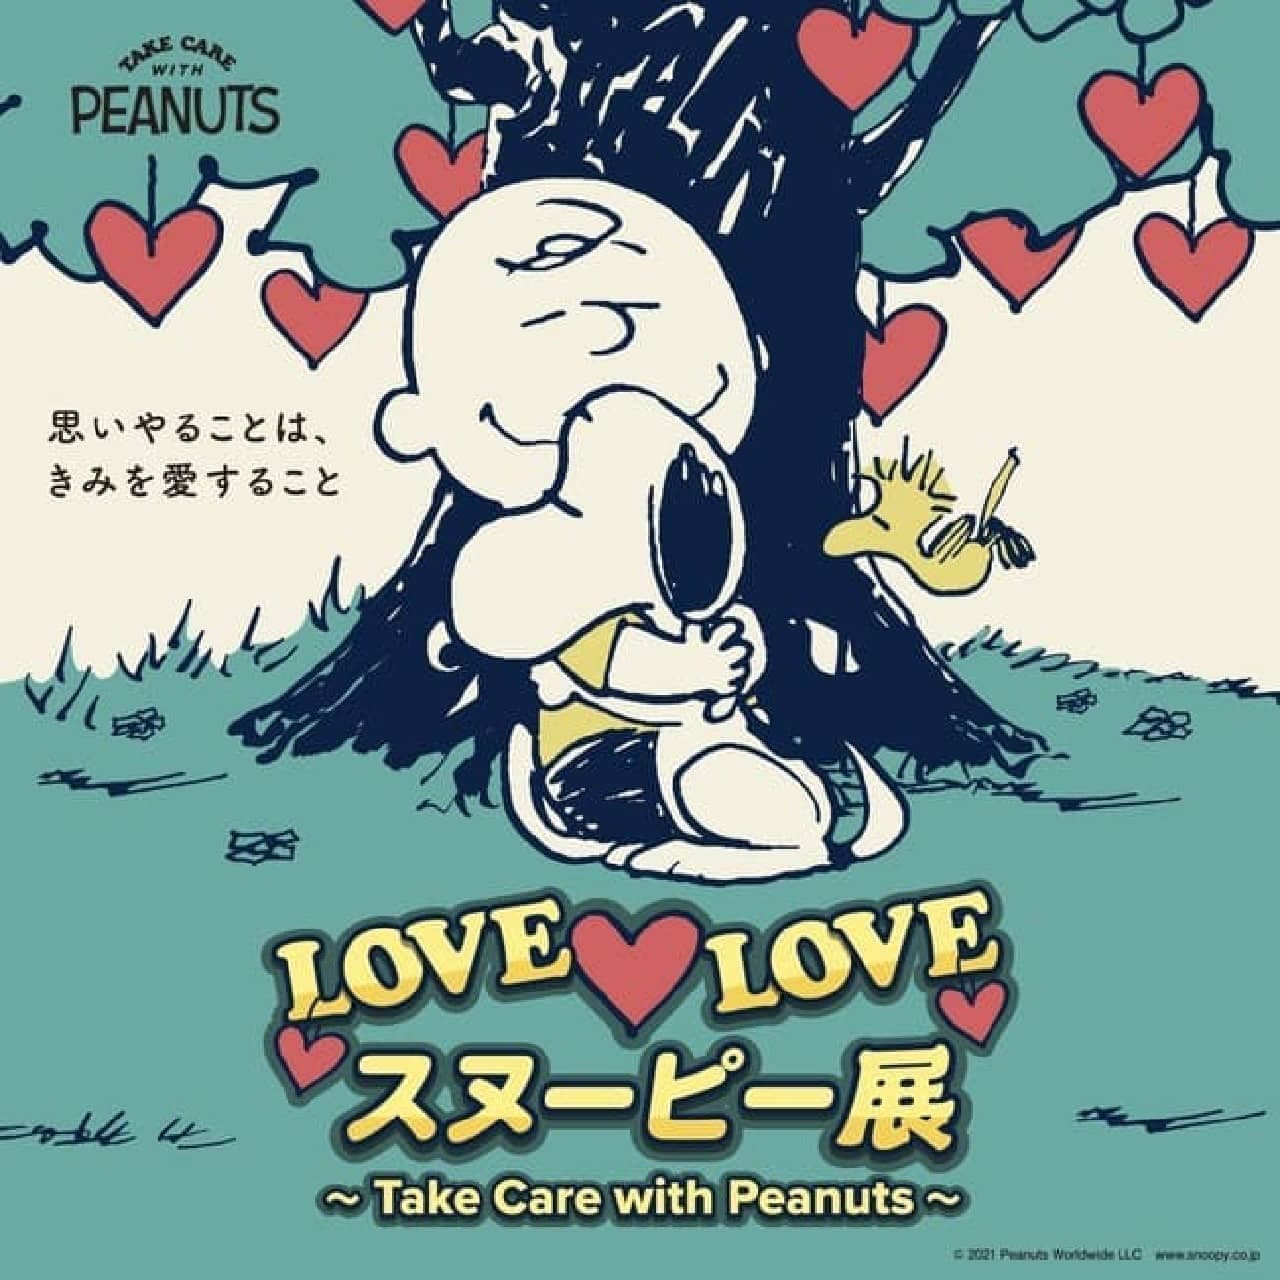 "LOVE LOVE Snoopy Exhibition-Take Care with Peanuts-" at Seibu Ikebukuro Main Store --First held nationwide! Exhibitions, commemorative goods, etc.